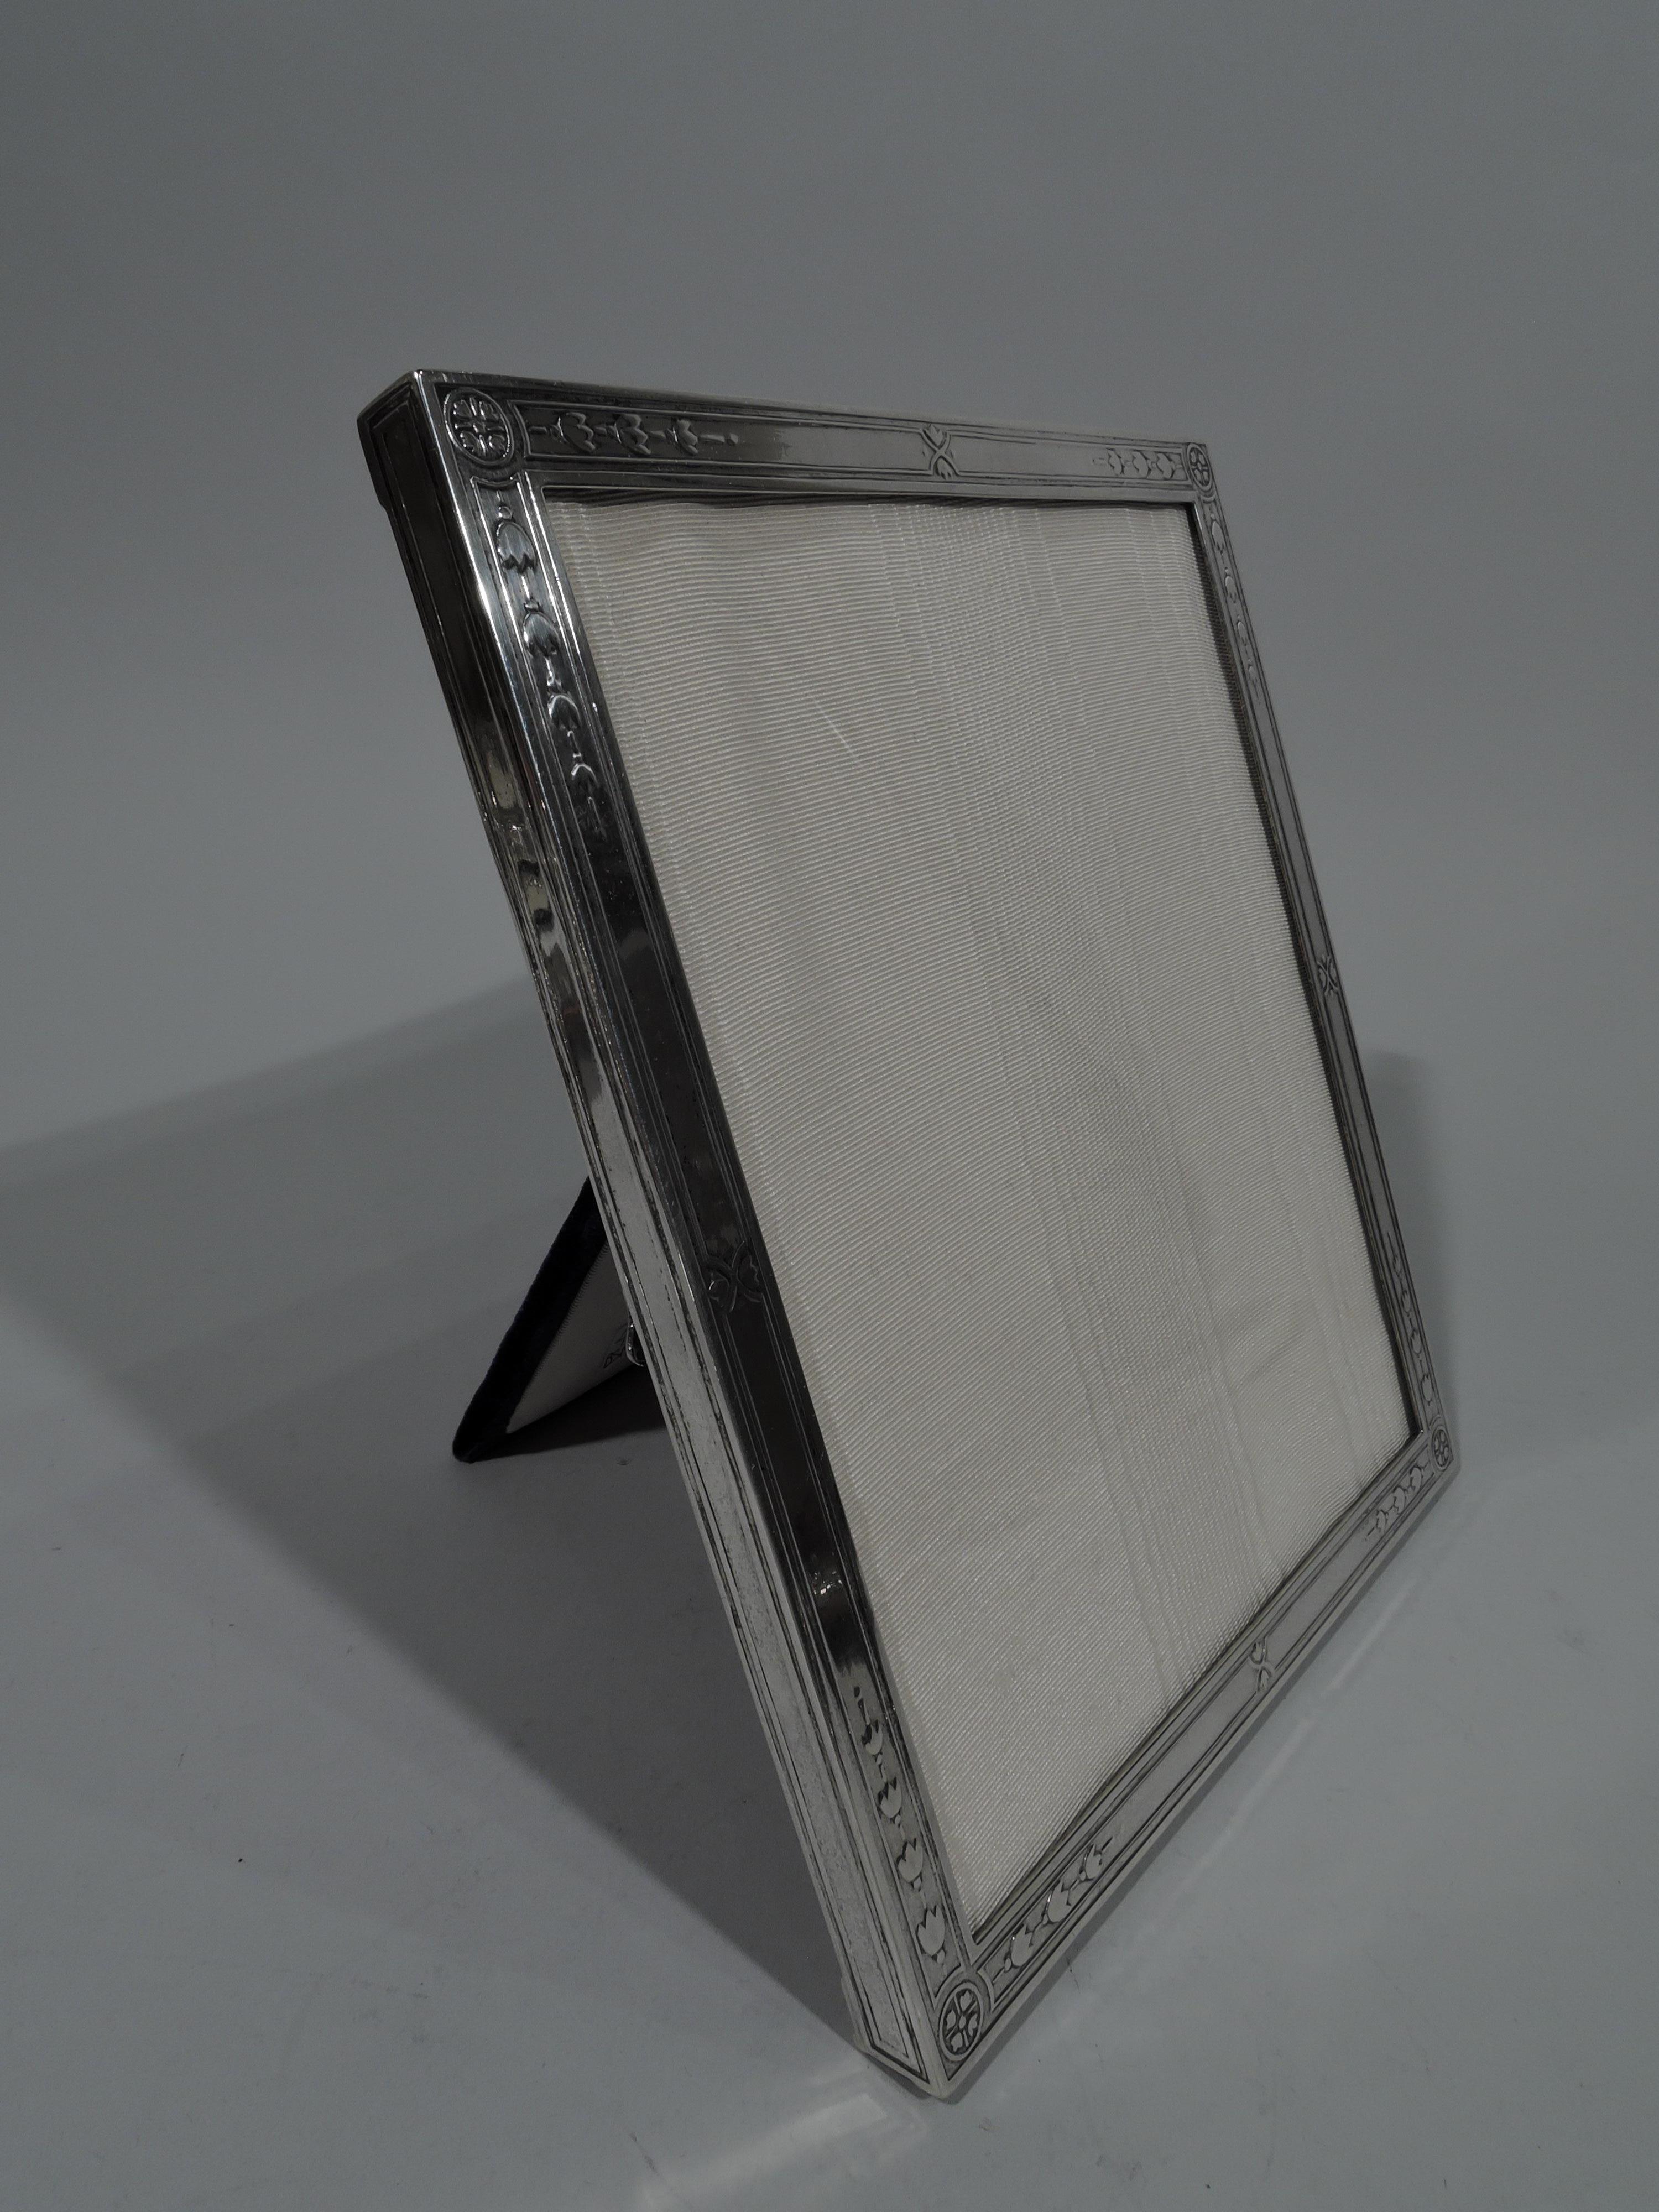 Edwardian sterling silver picture frame. Made by Tiffany & Co. in New York, circa 1910. Rectangular window and flat surround with acid-etched ornament: Stylized flowers in rectilinear frames and corner paterae. Sides have same frames. With glass,